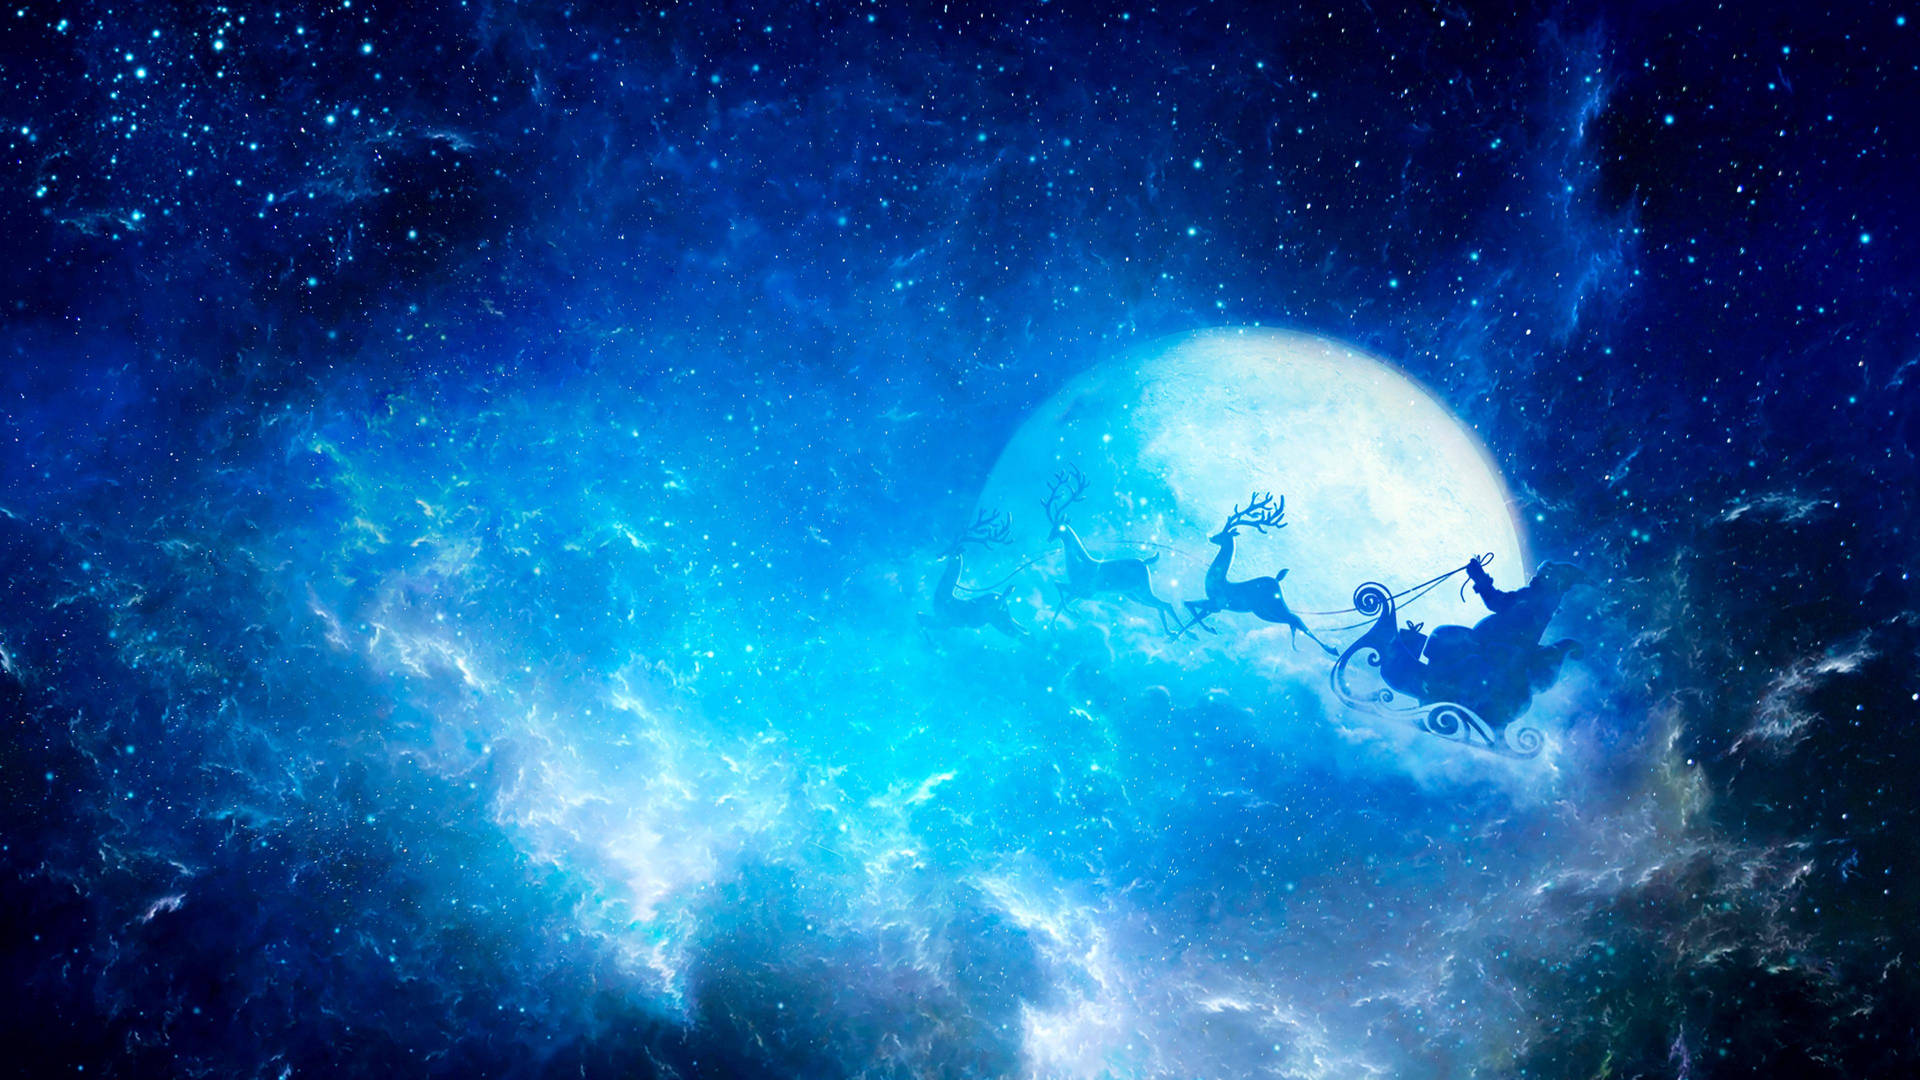 Santa Claus Flying Through The Sky With A Blue Moon